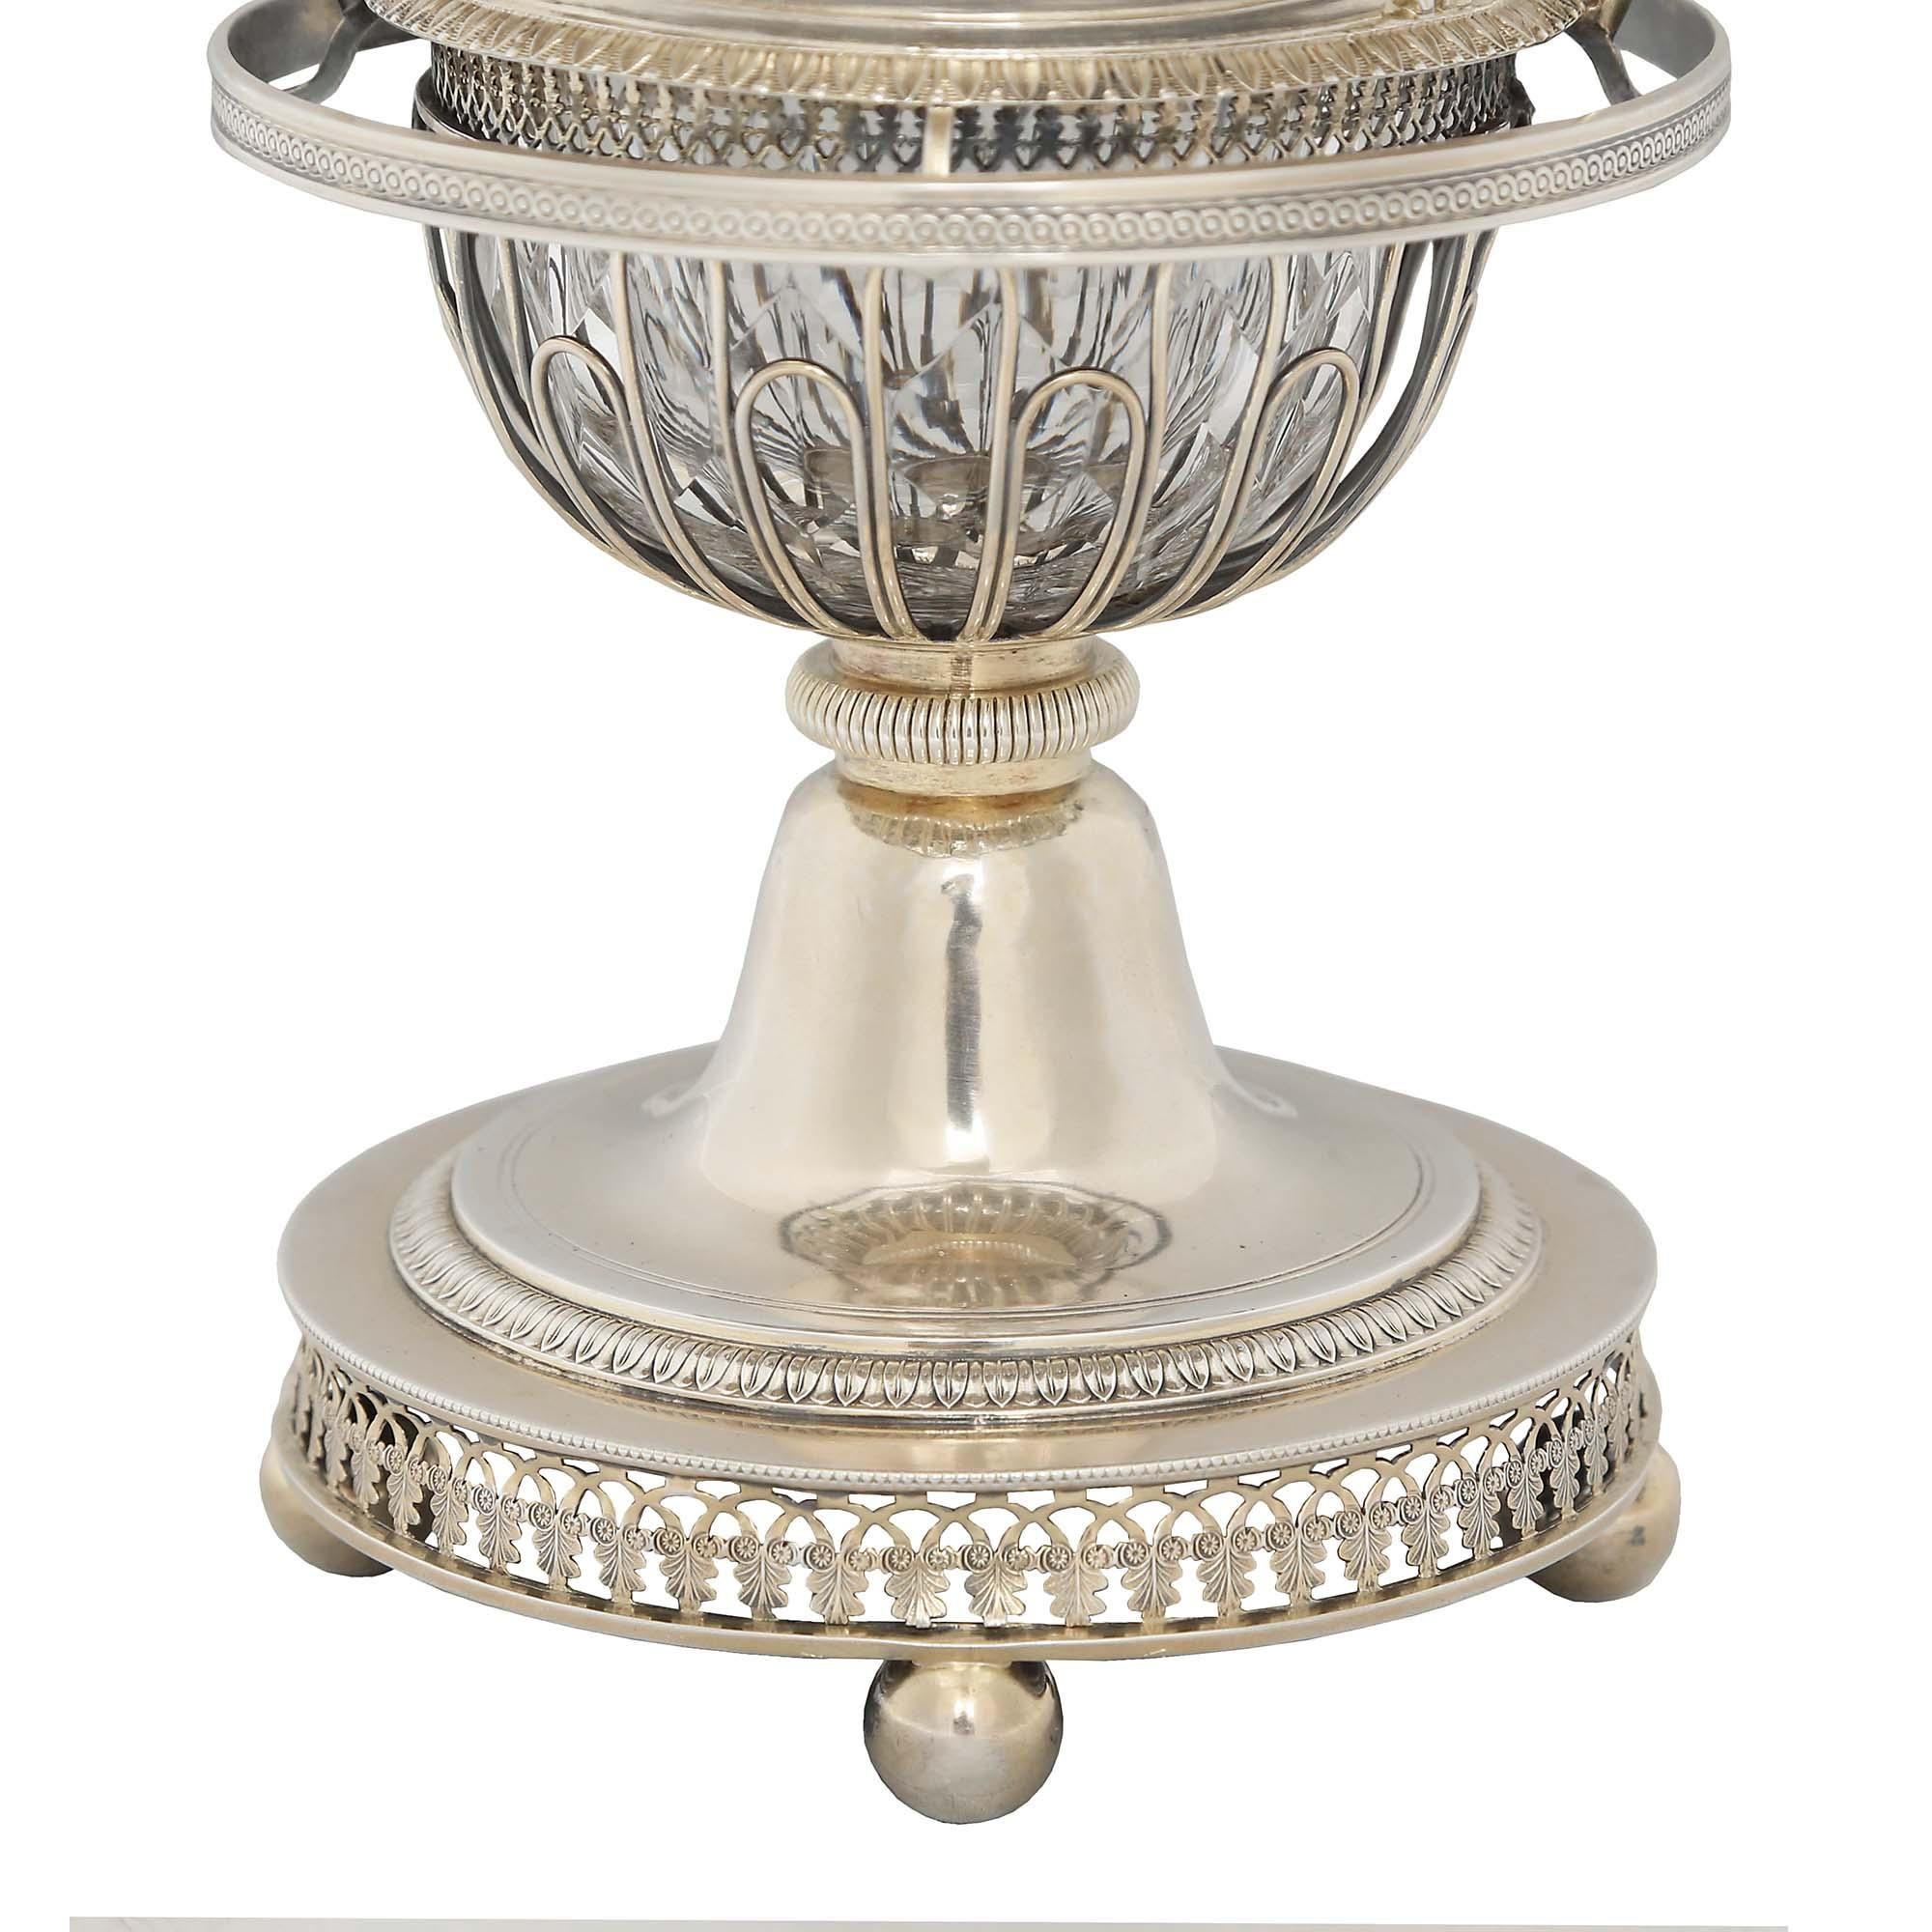 French 19th Century Empire St. Sterling Silver Caviar Server For Sale 4